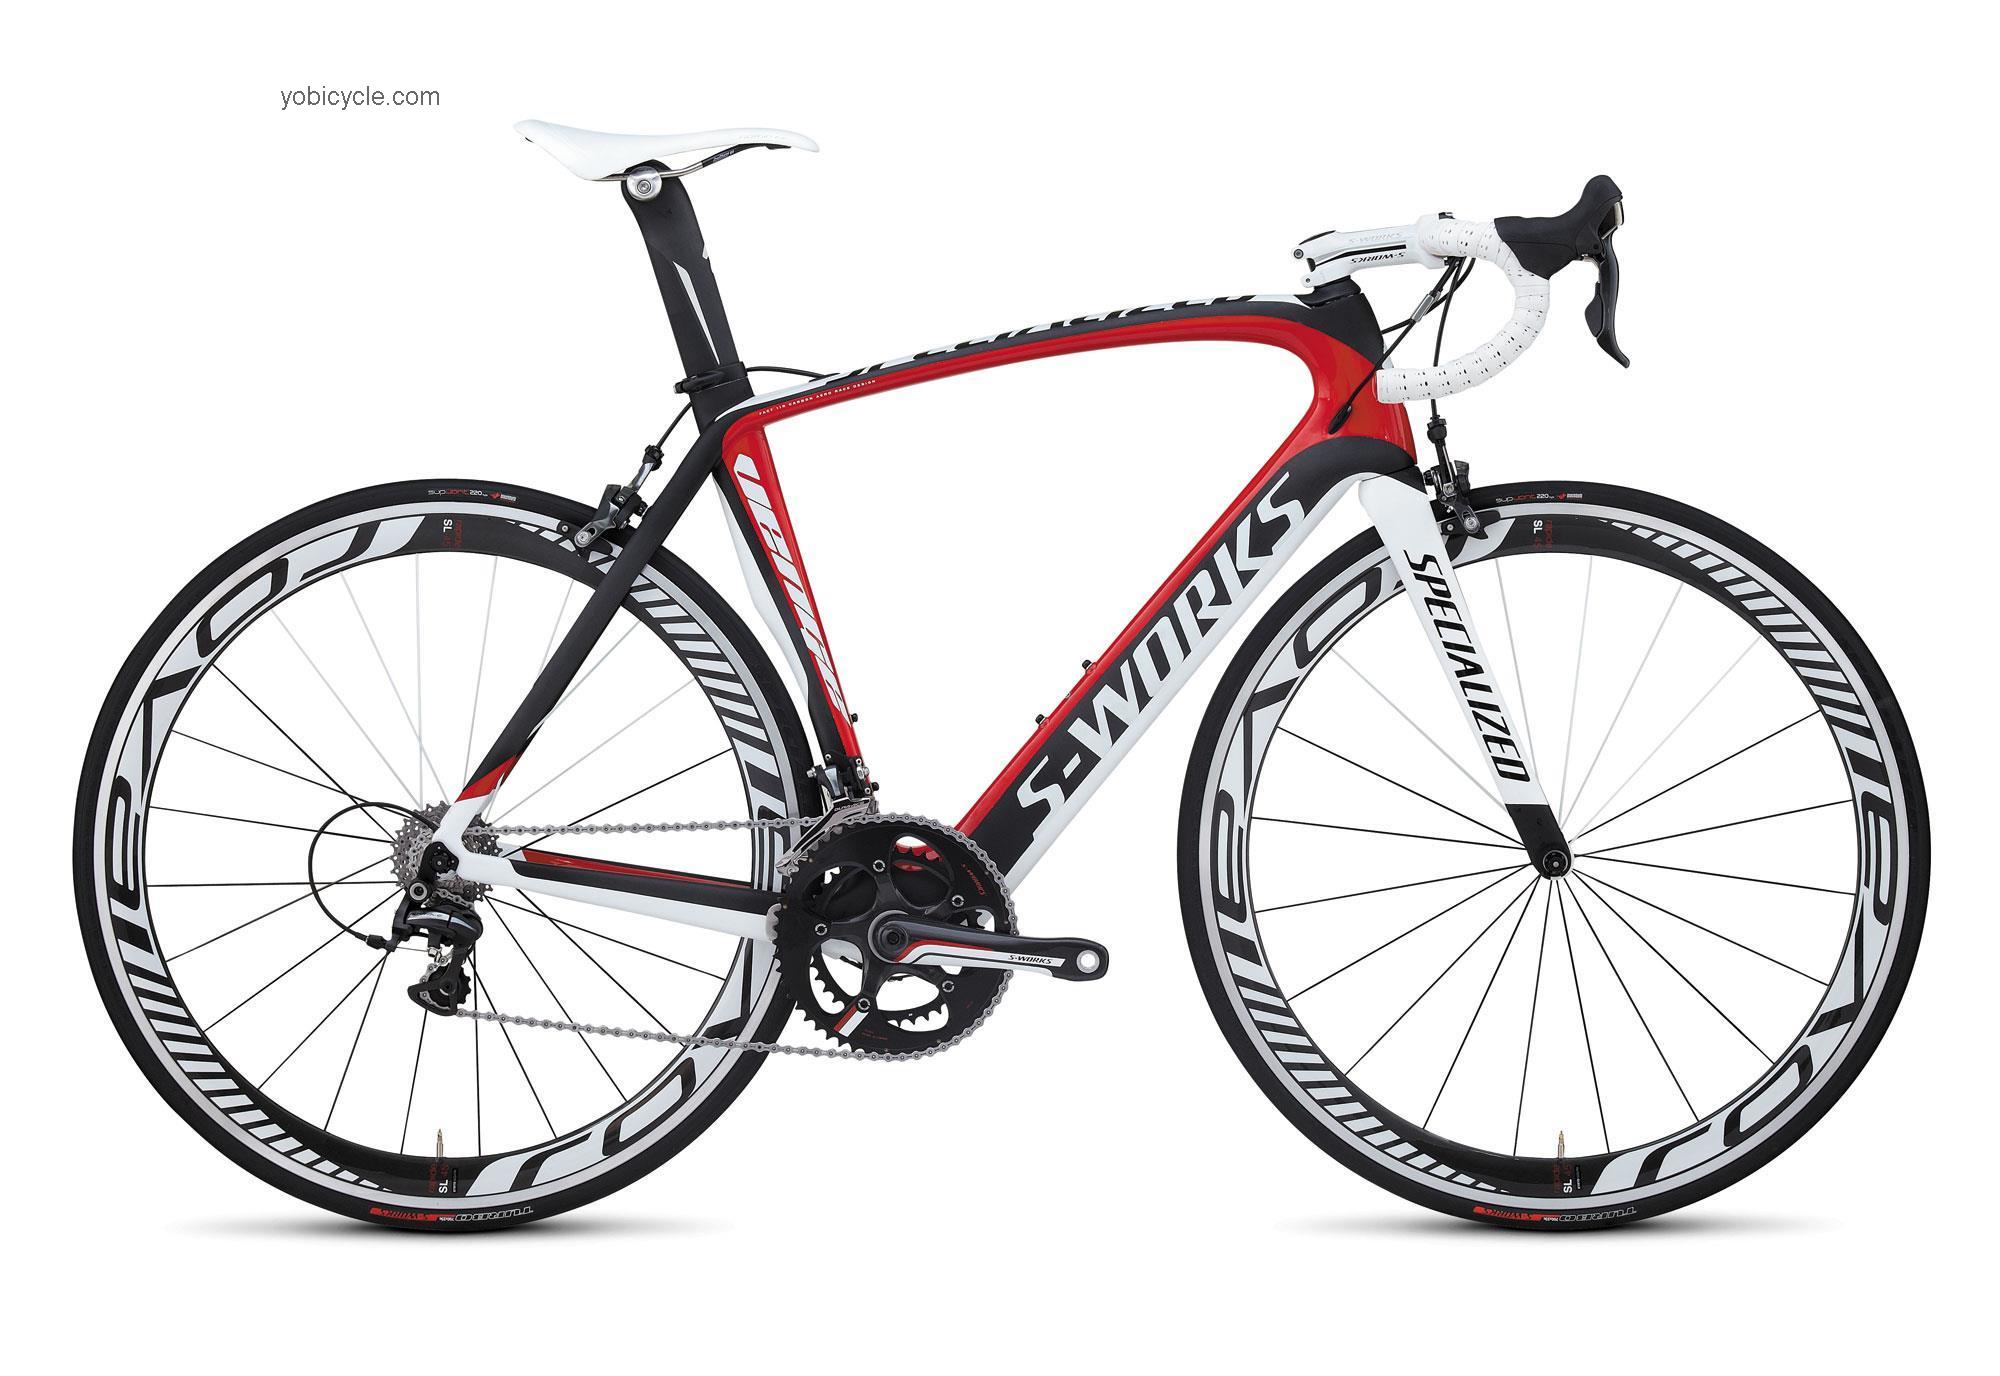 Specialized S-Works Venge Dura-Ace 2012 comparison online with competitors